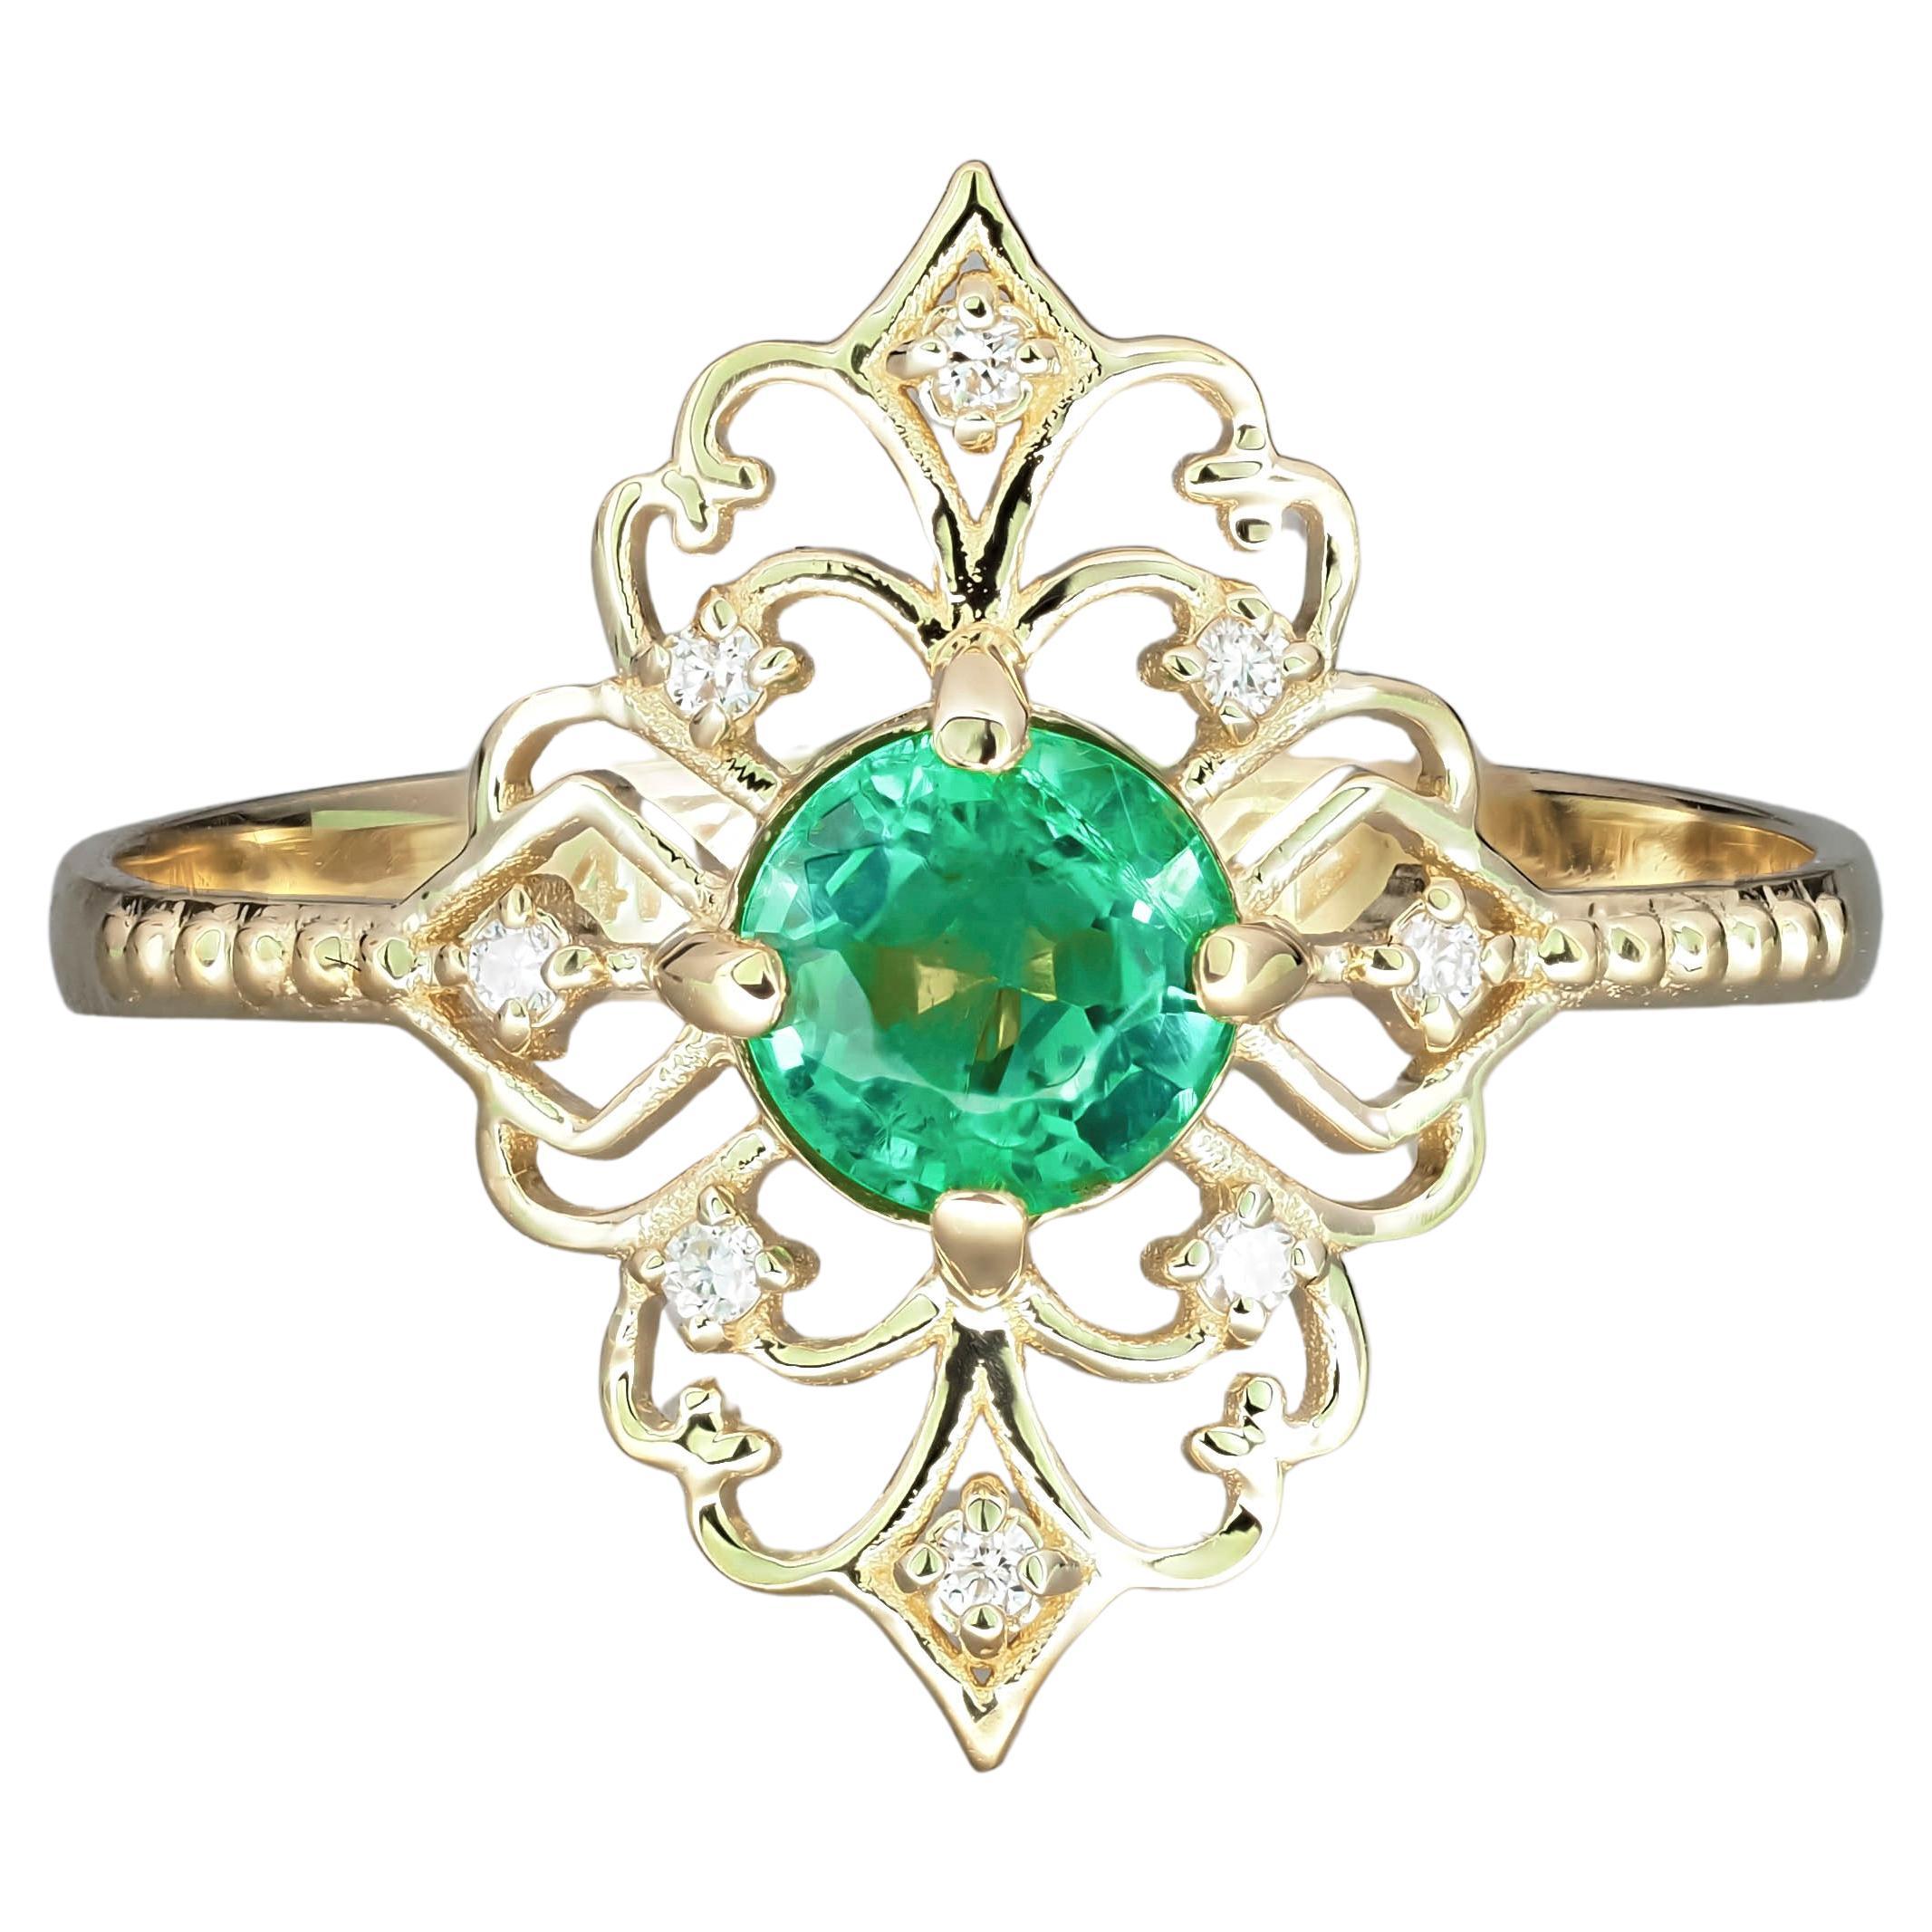 14 kt yellow gold ring with emerald and diamonds  

Weight approx. 1.6 g.
Set with emerald, color - bluish green
Round cut, 0.50 ct. in total.
Clarity: Transparent with inclusions

Surrounding stone - diamonds 0.08 (8x0.01) ct (F/VS), round